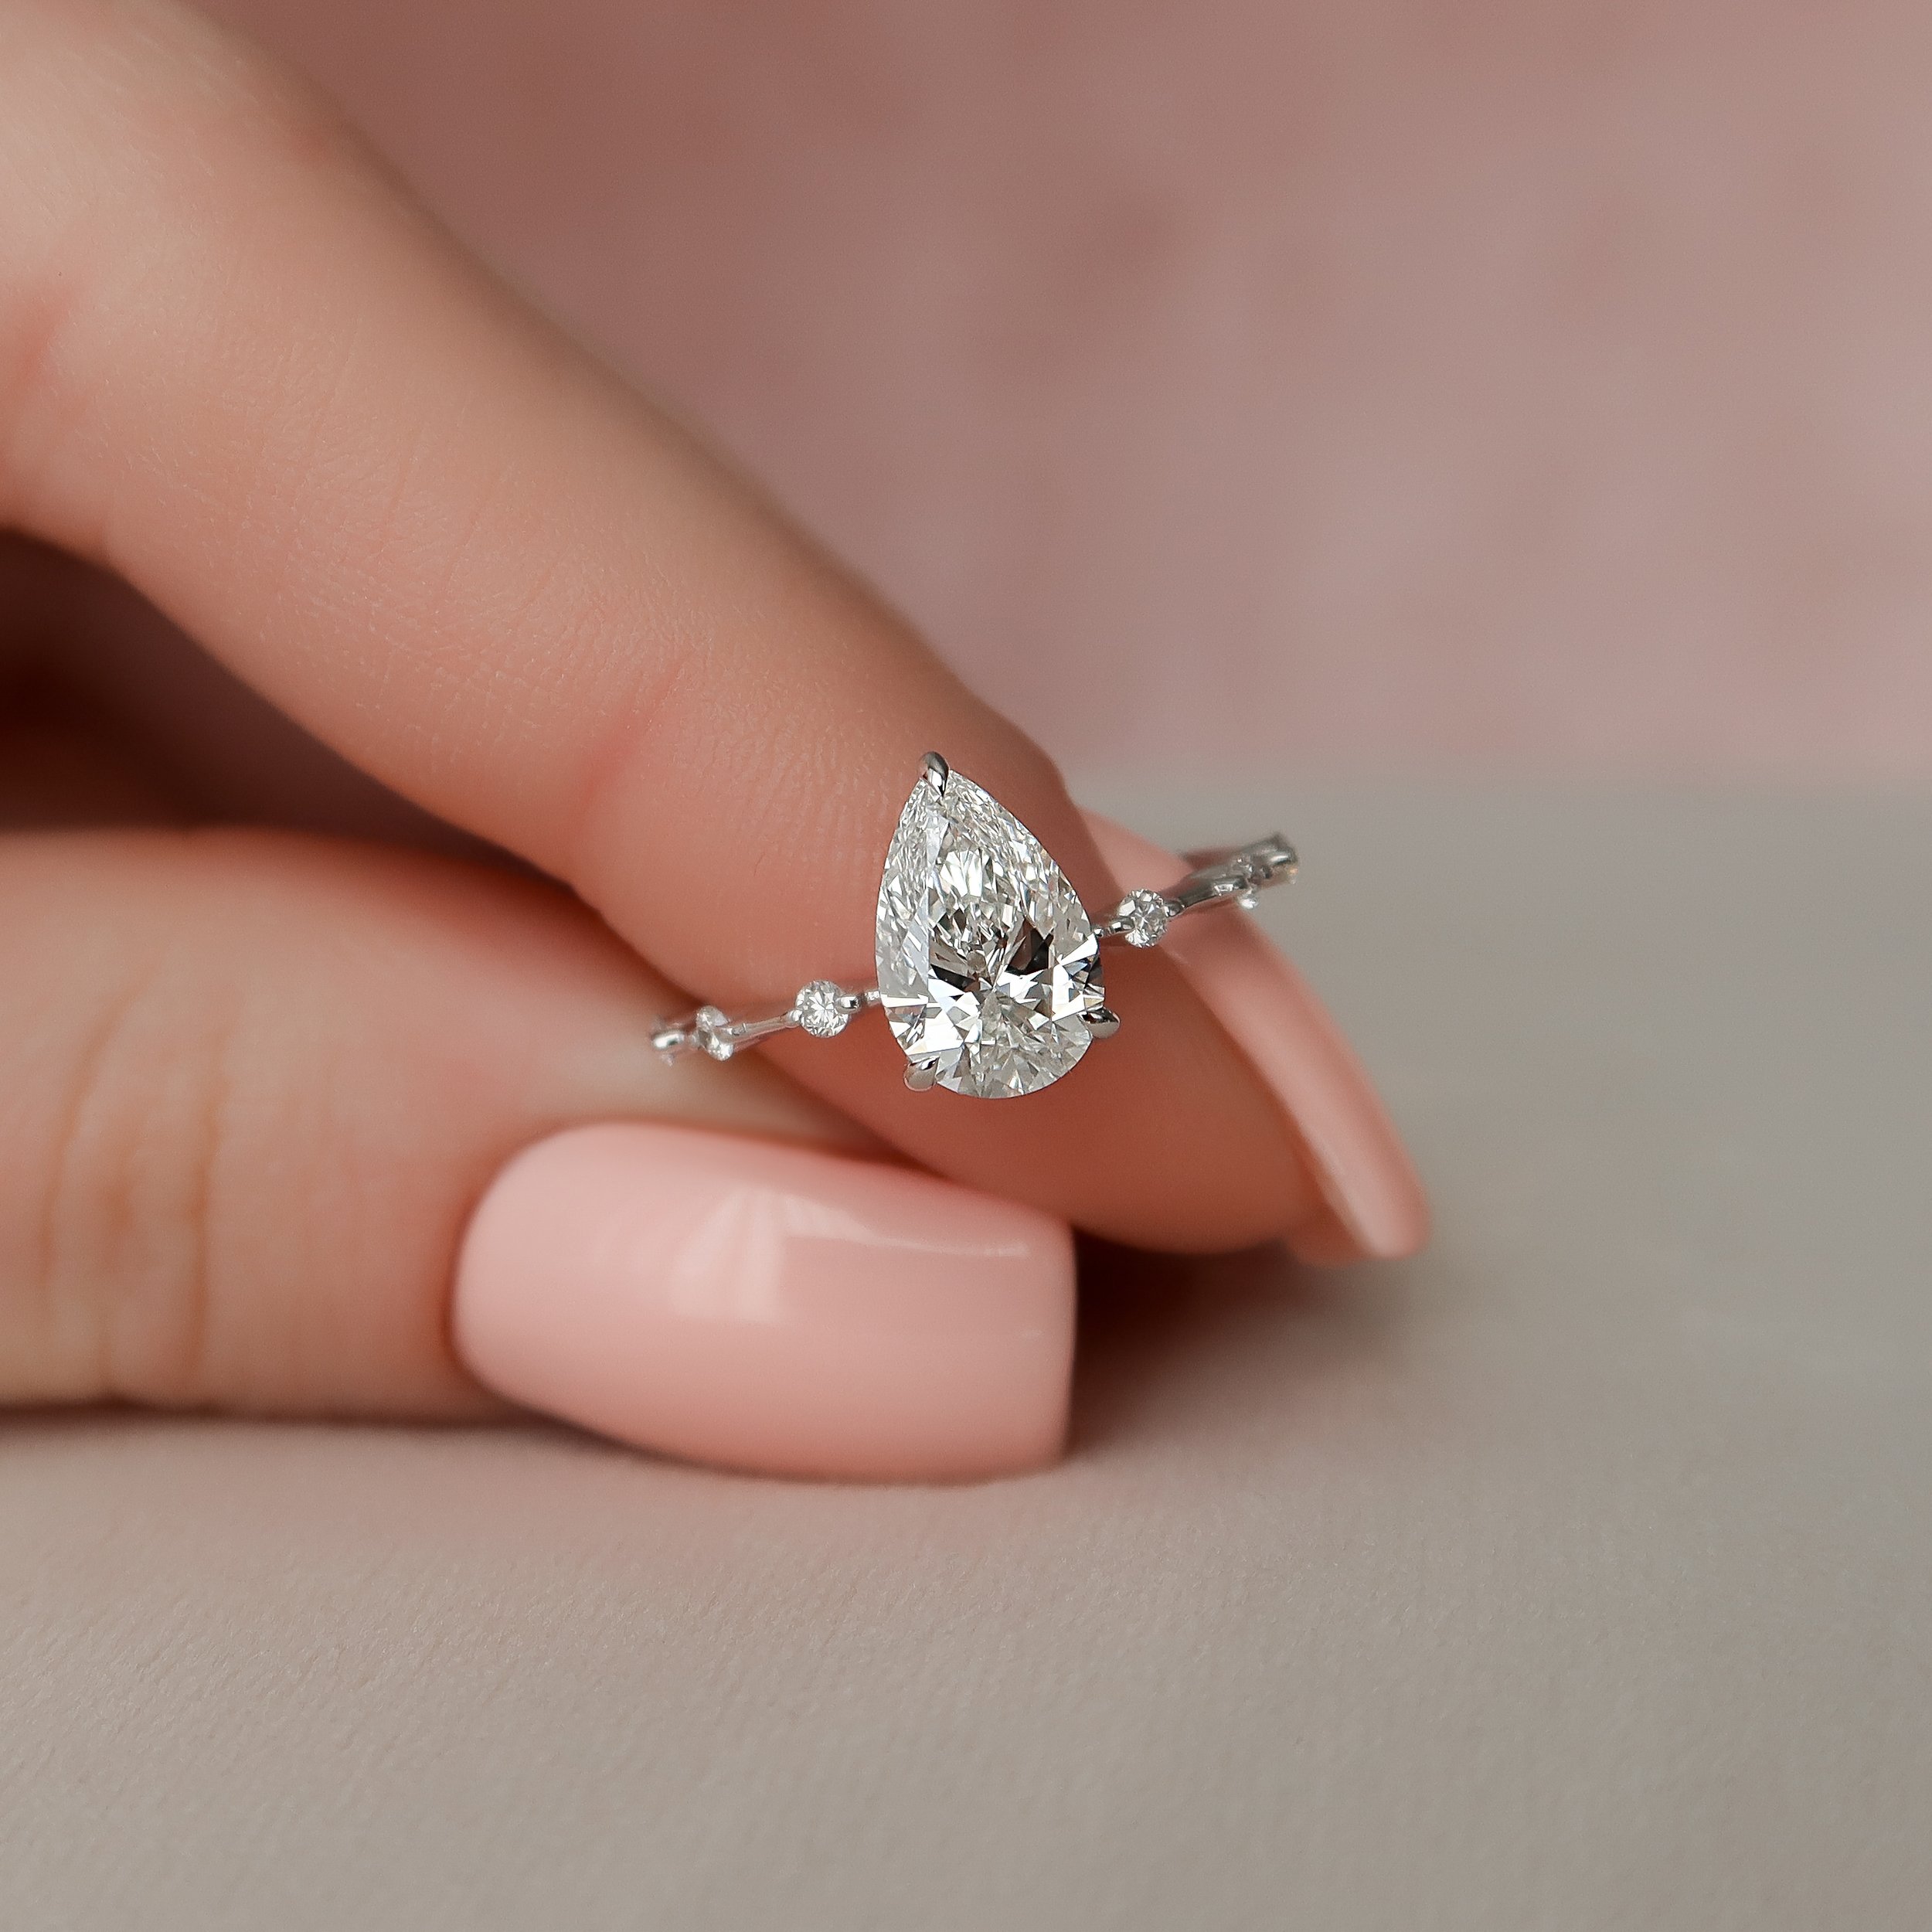 Do People Wear Pear-Shaped Diamonds for an Engagement Ring?